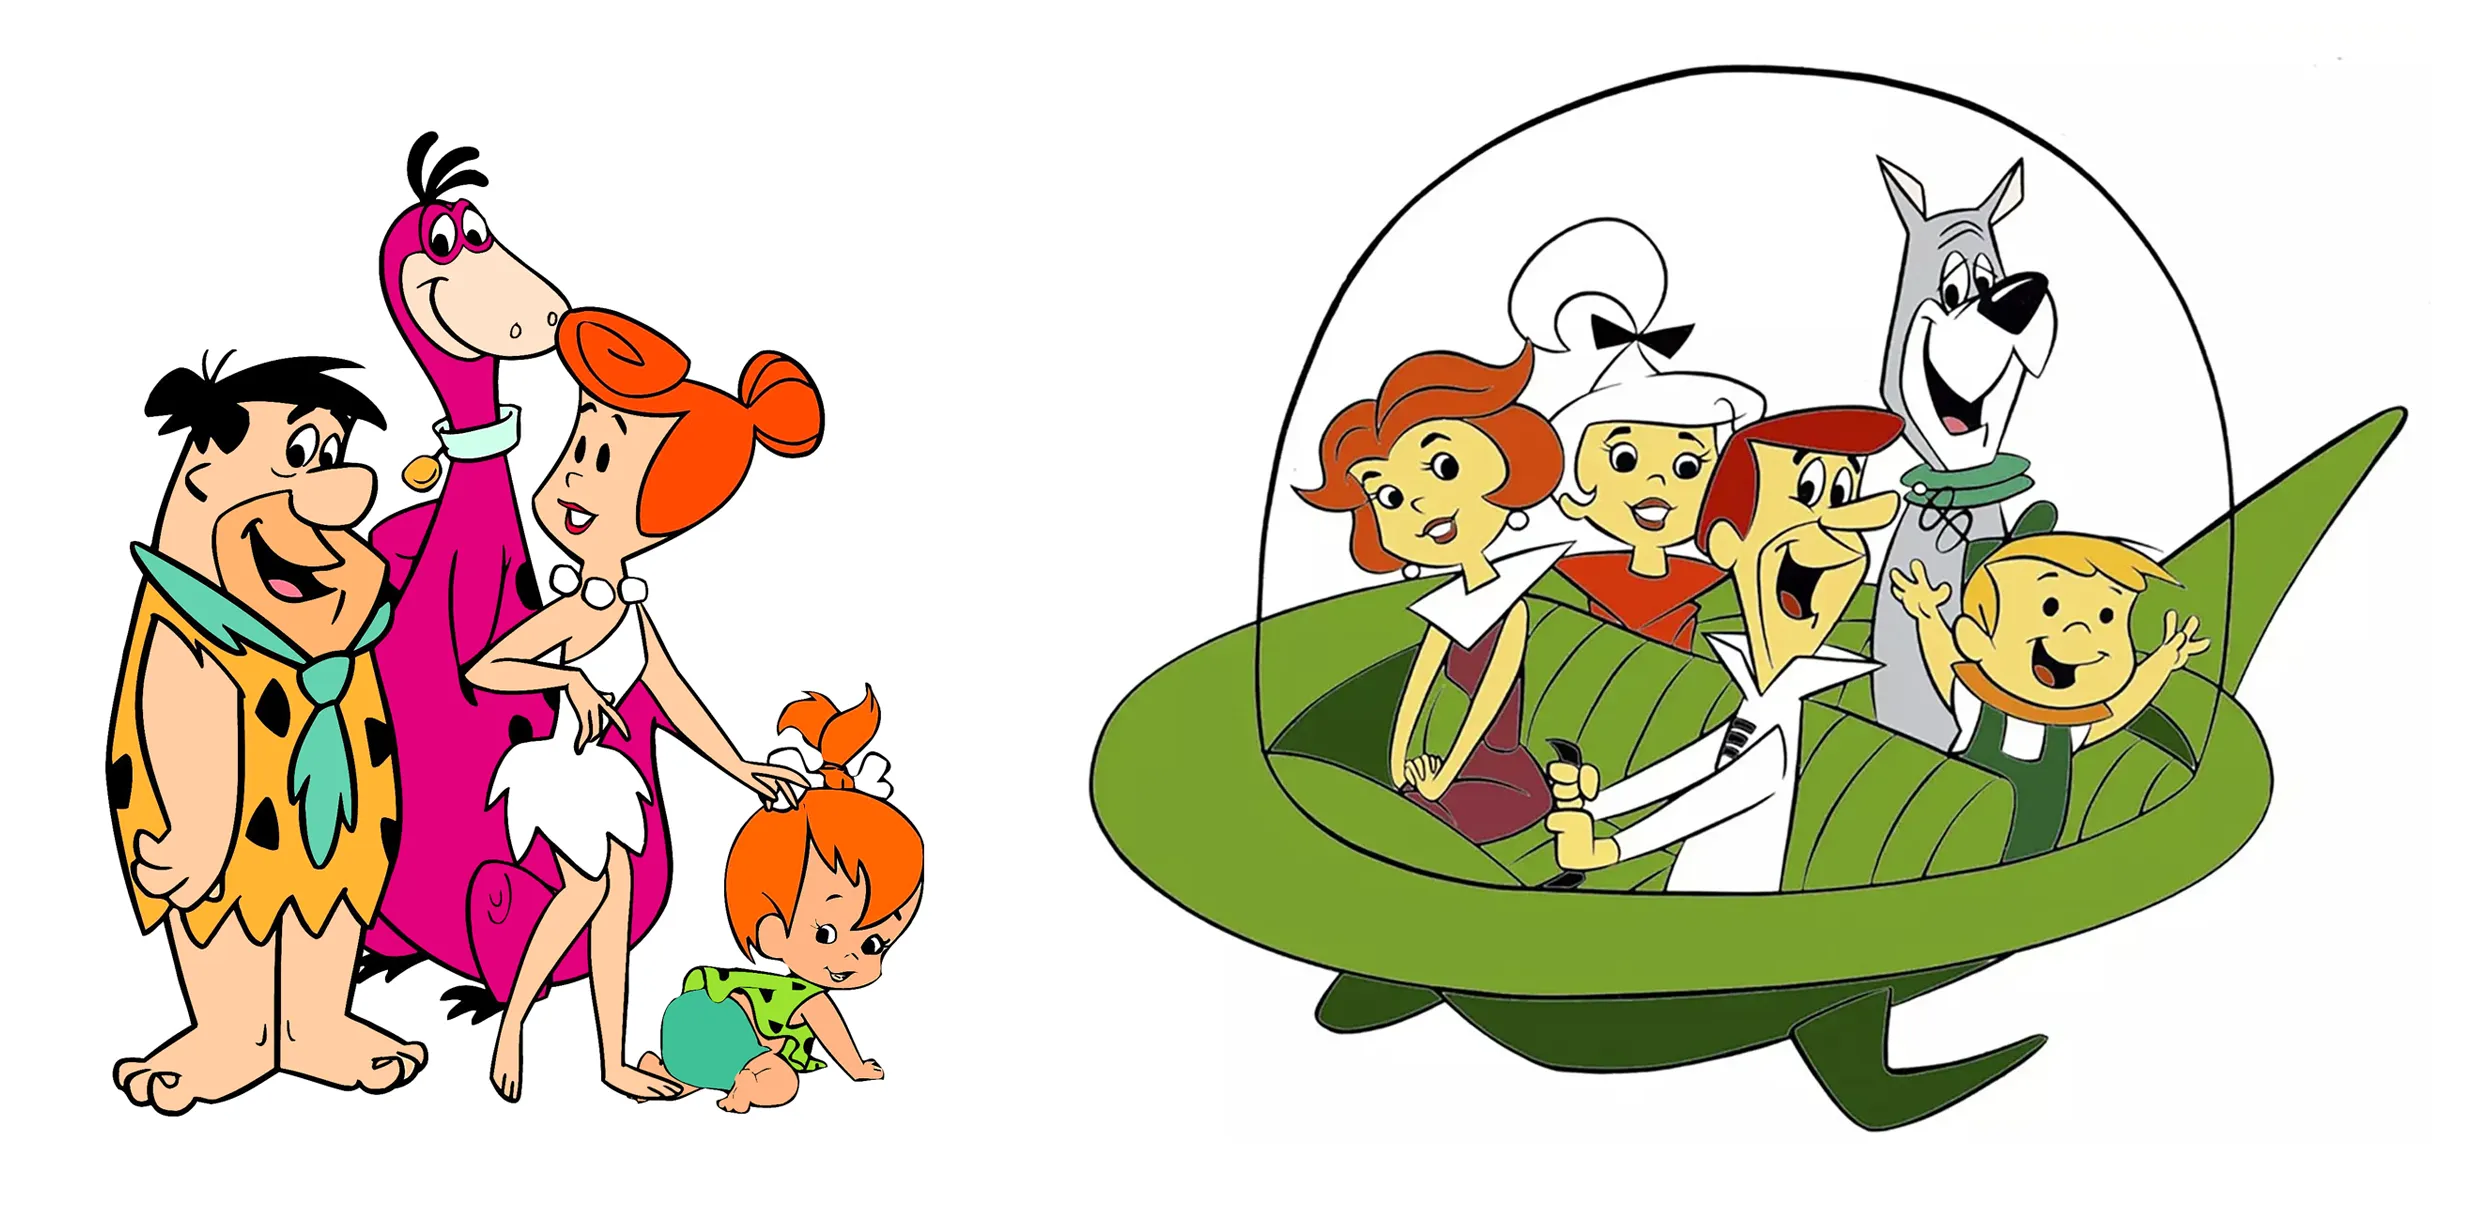 Left: Fred, Wilma and Pebbles Flintstones and their pet dinosaur Dino. Right: Jane, Judy, George, Elroy and their dog Astro in a spaceship.